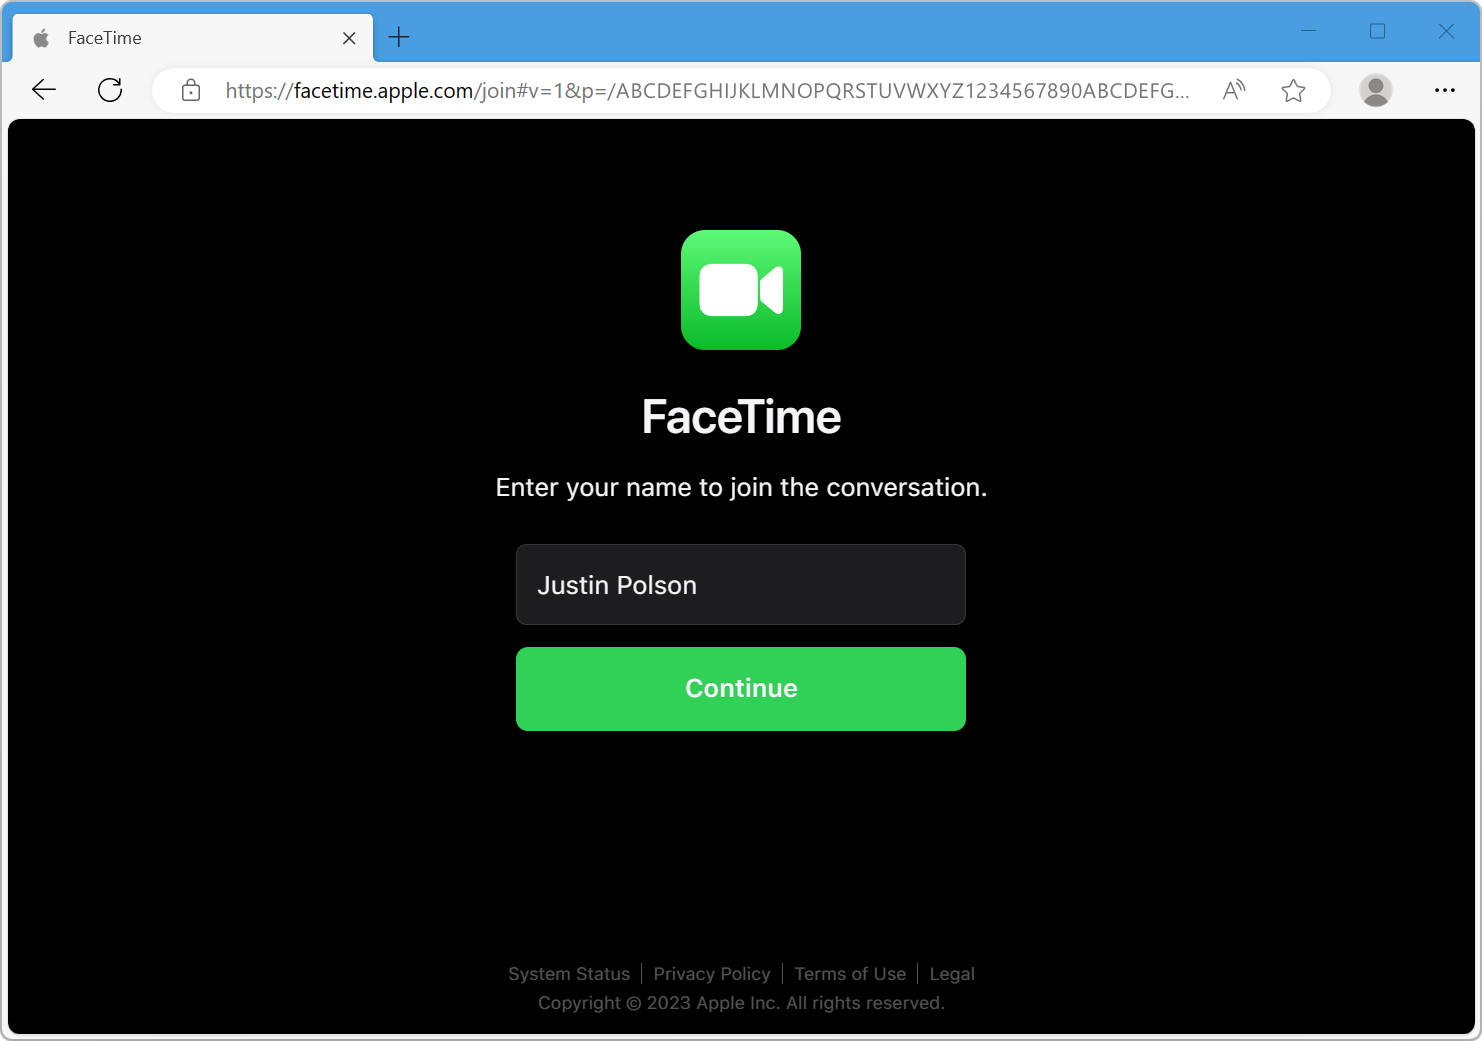 Browser window for a FaceTime link